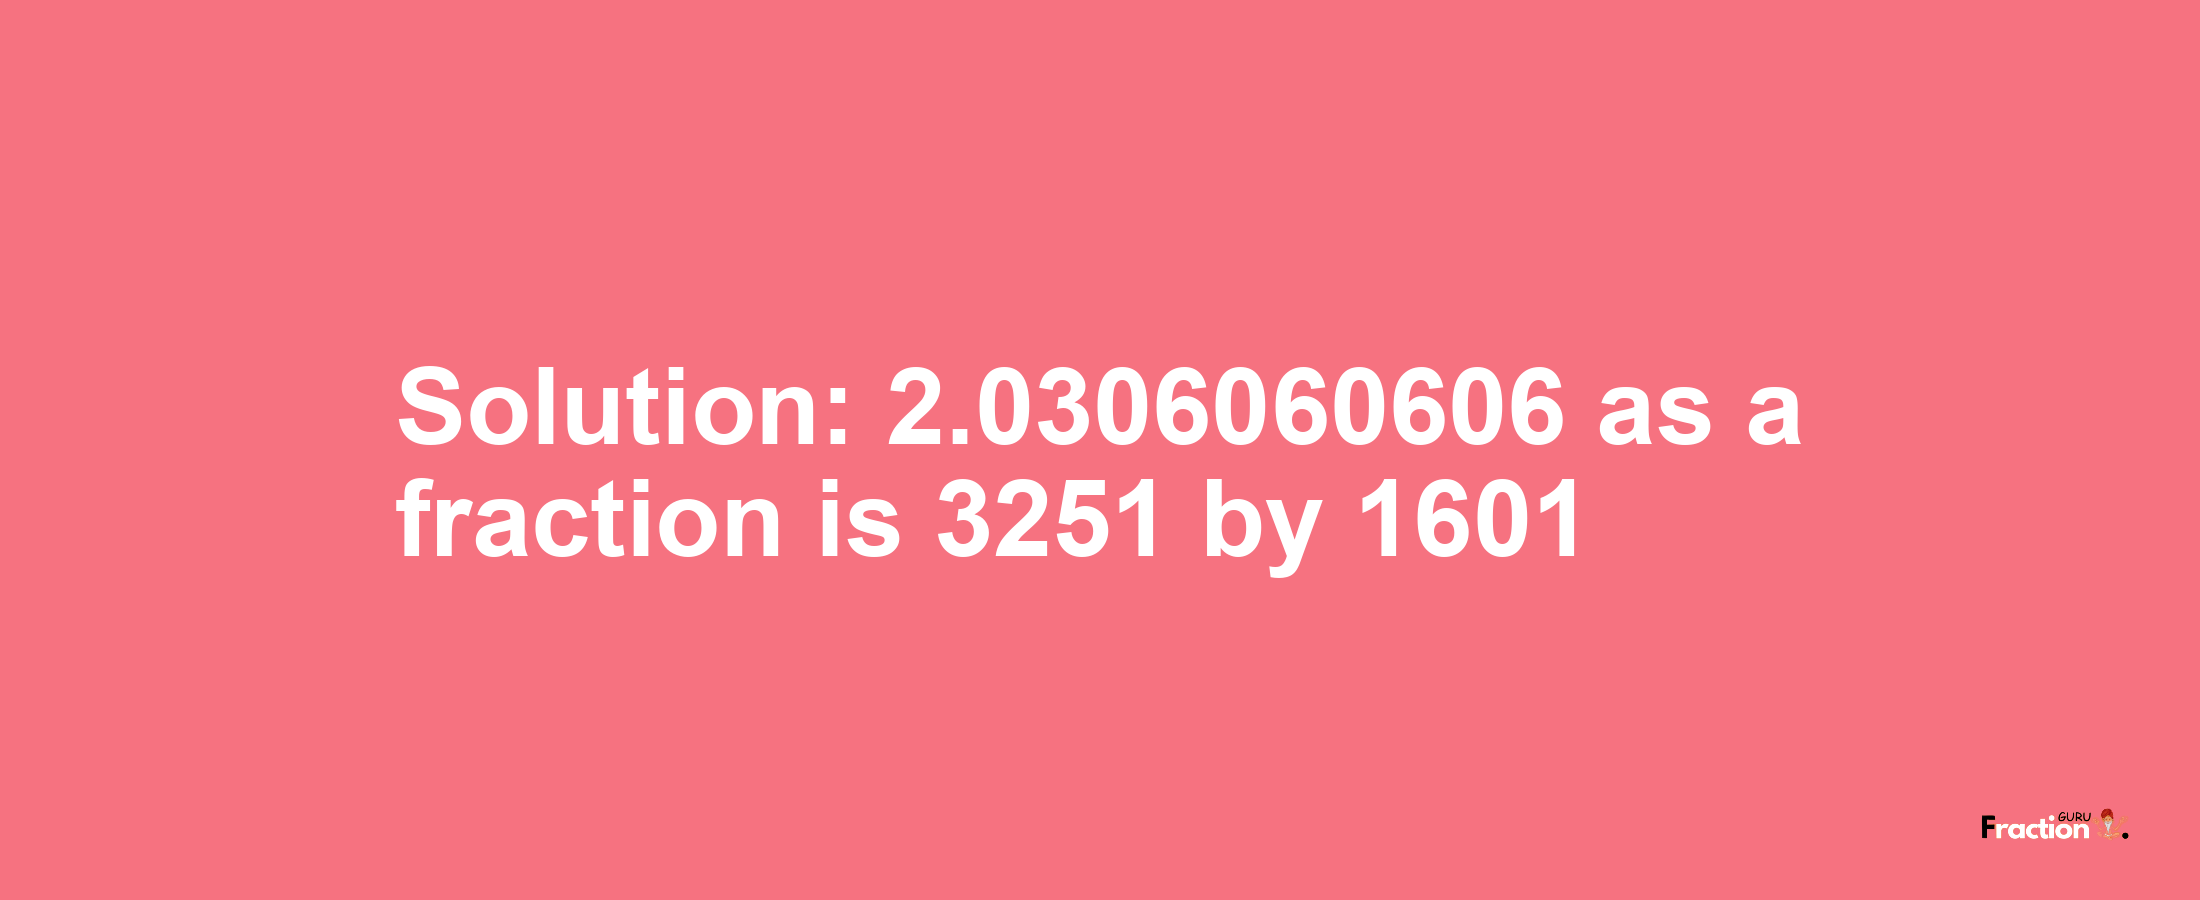 Solution:2.0306060606 as a fraction is 3251/1601